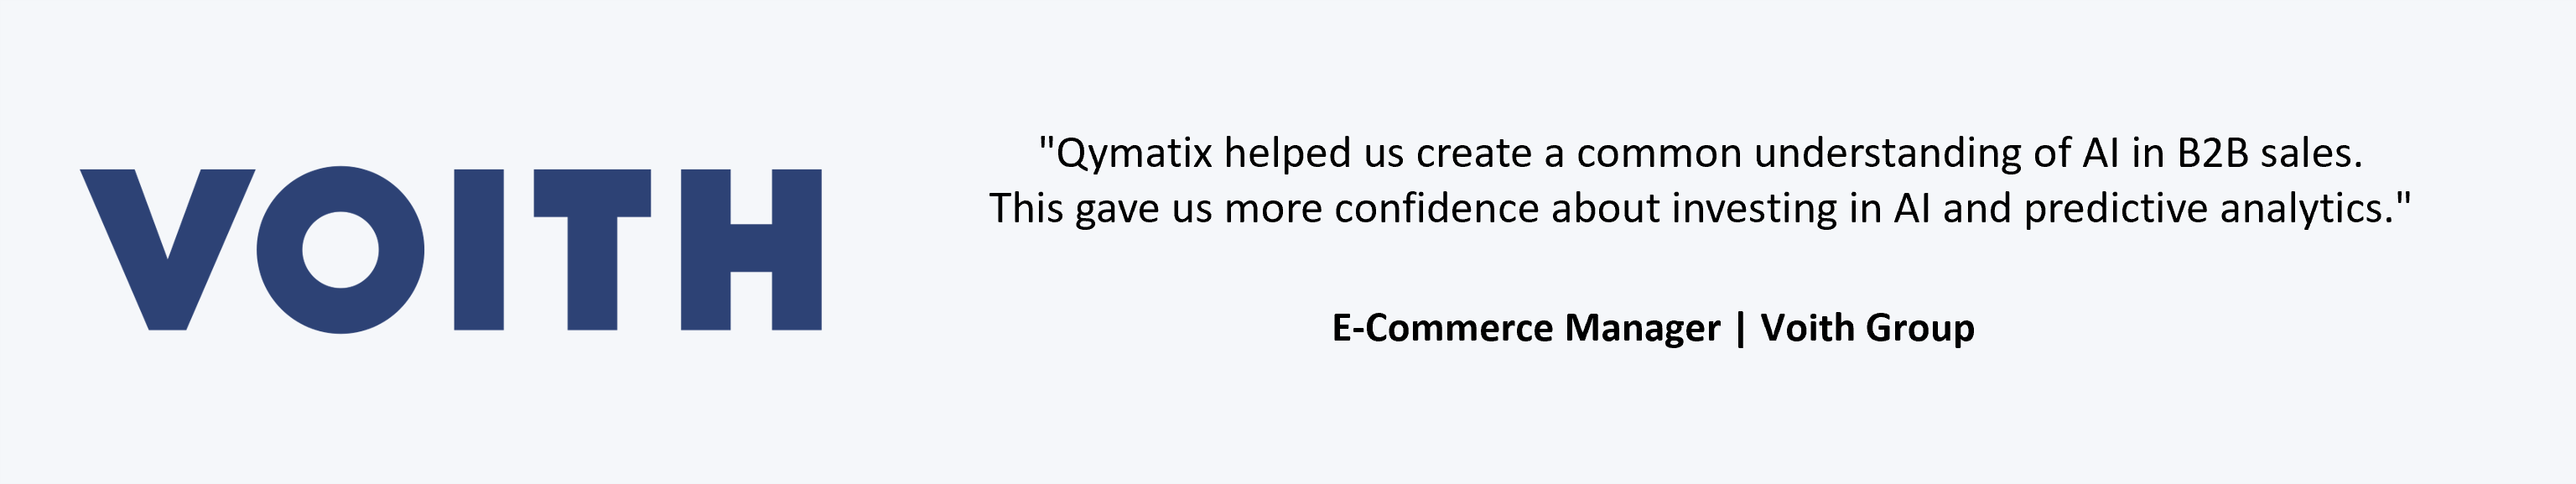 Reference Voith for Qymatix